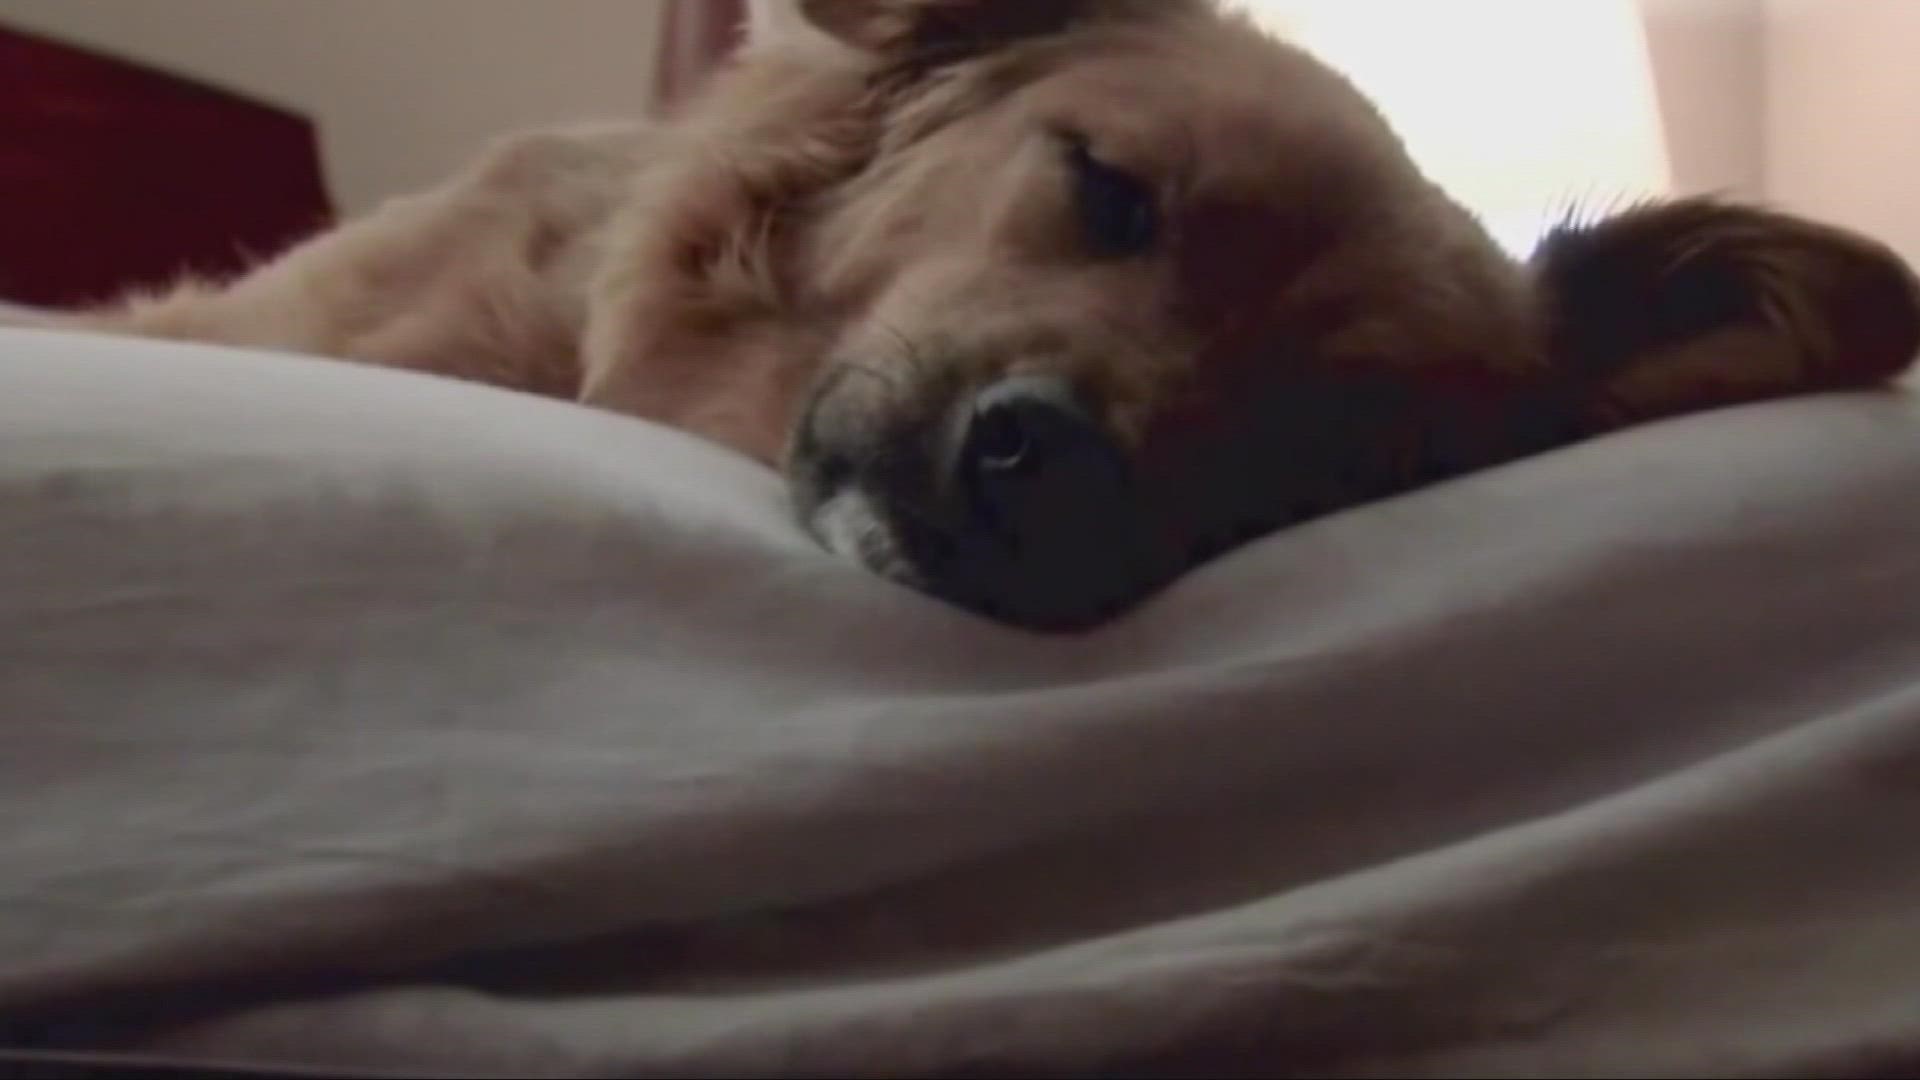 About half of all pet owners say they share their bed with pets. But are they sacrificing a good night's sleep?